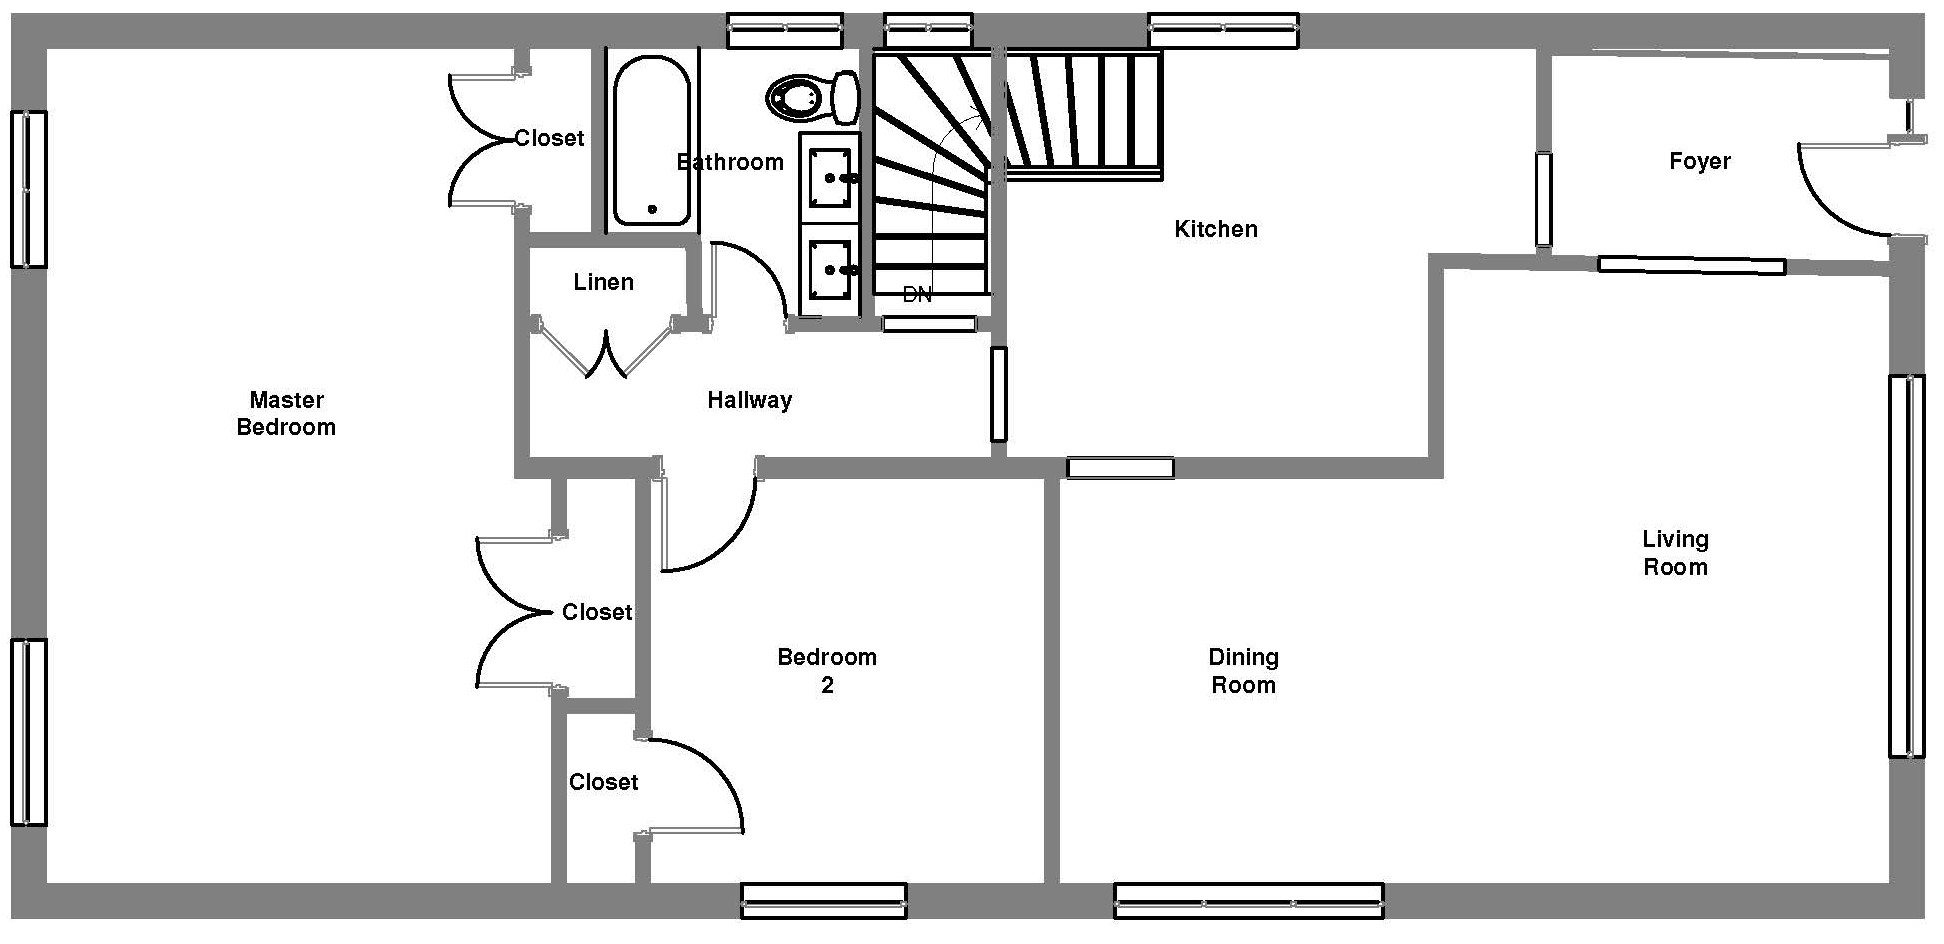 Current main floor layout